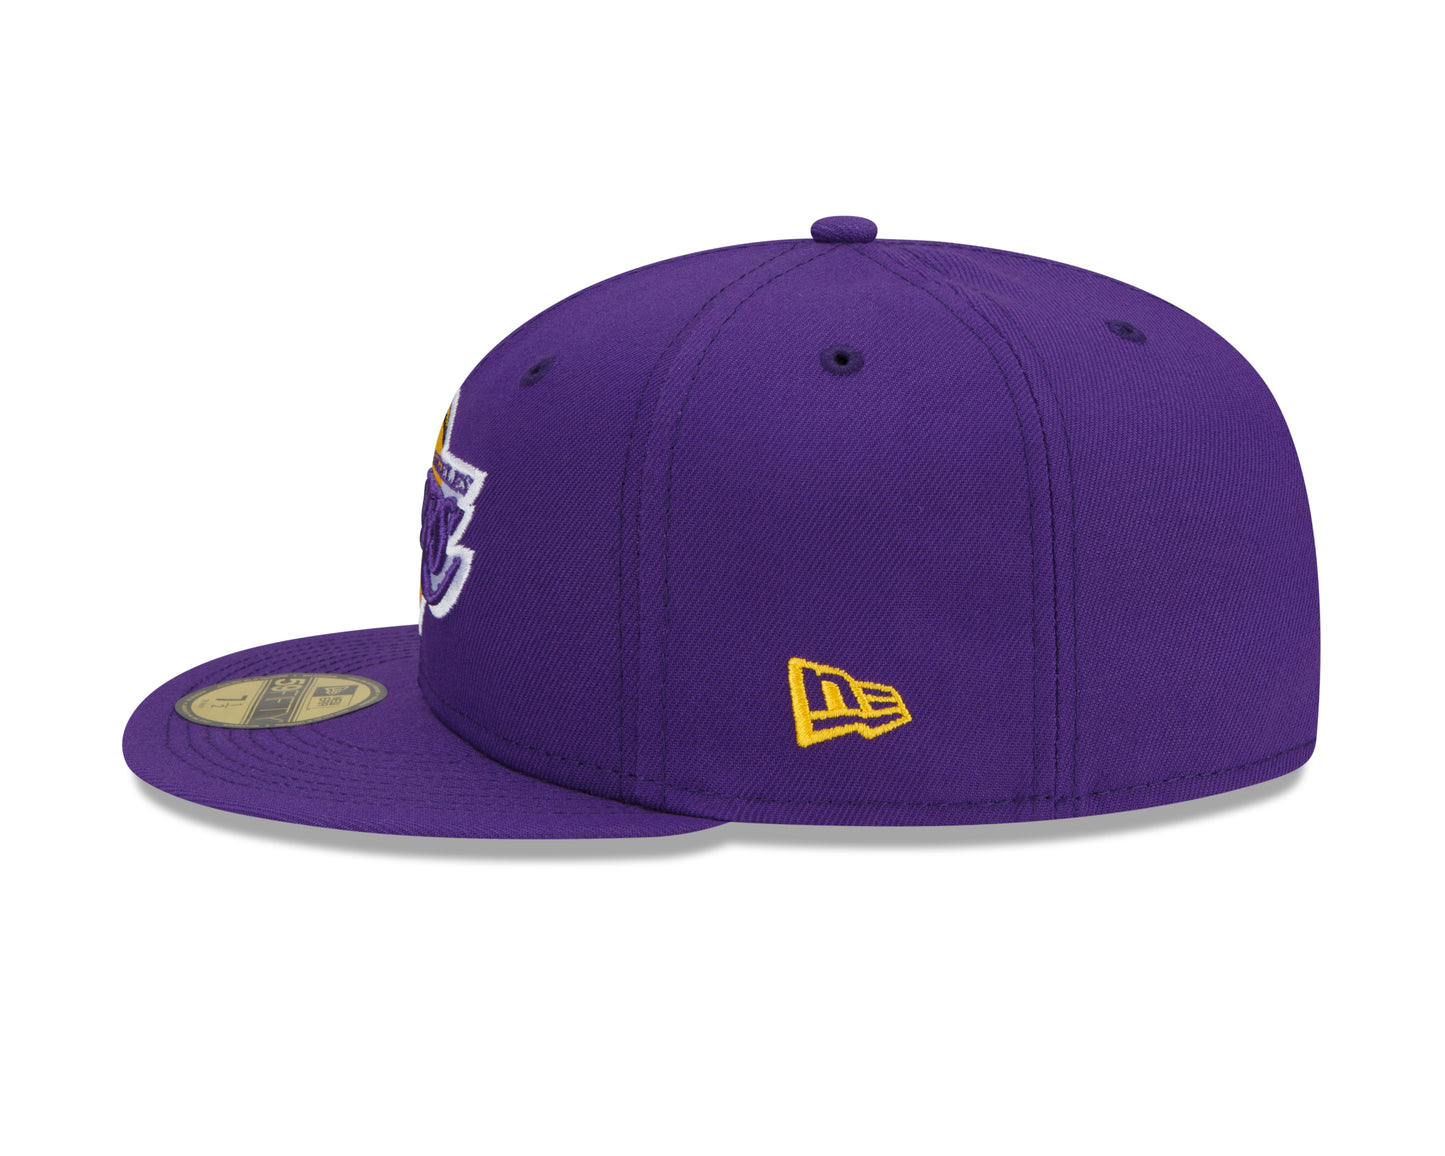 Los Angeles Lakers New Era Team Color Back Half 59fifty Fitted Hat